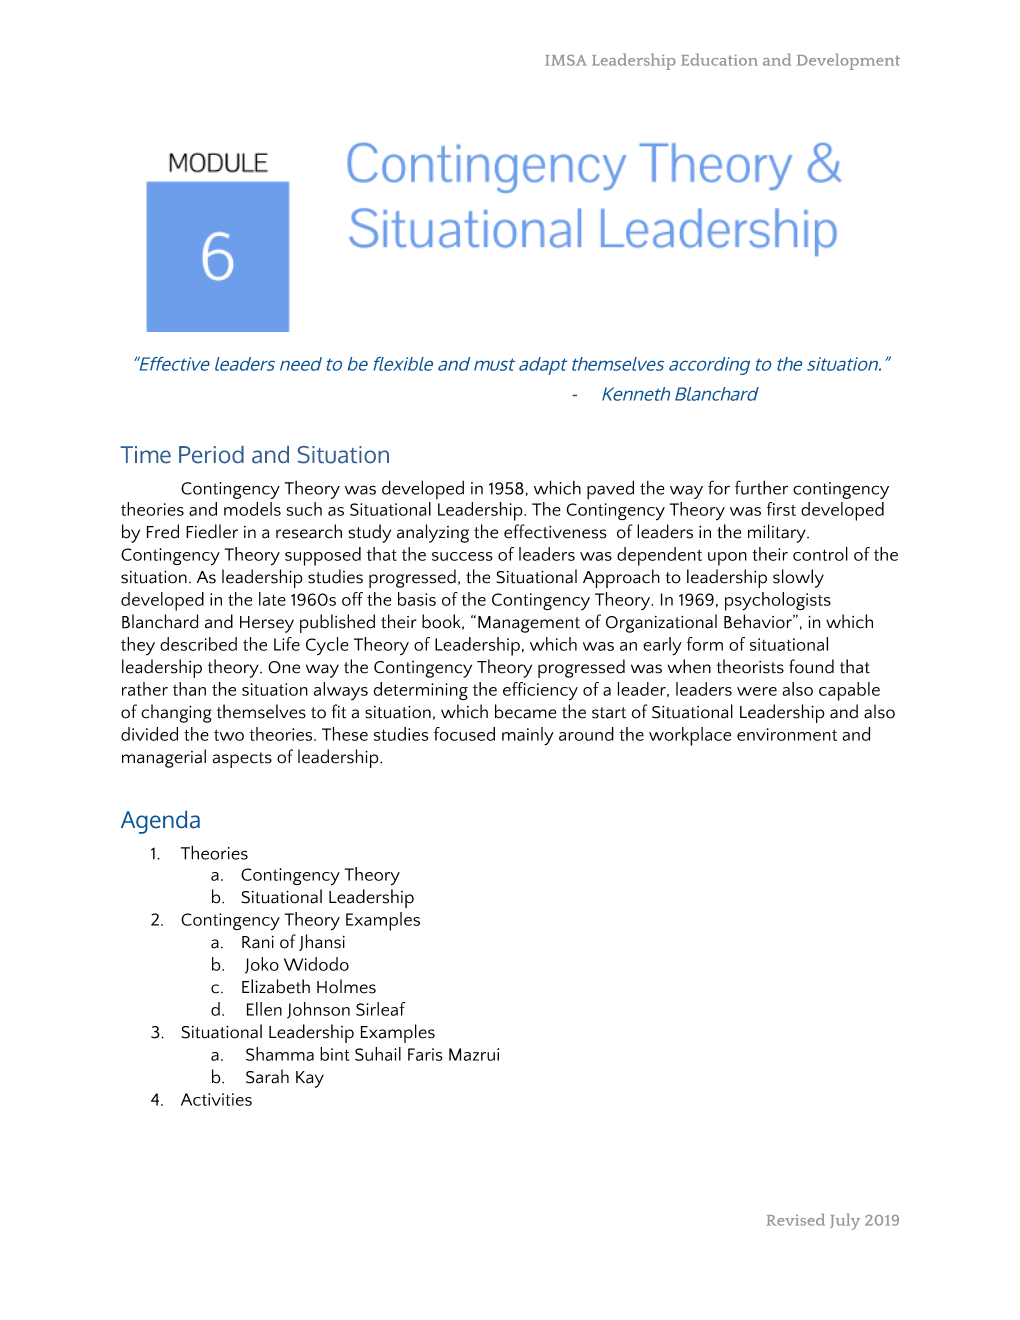 06. Contingency Theory & Situational Leadership